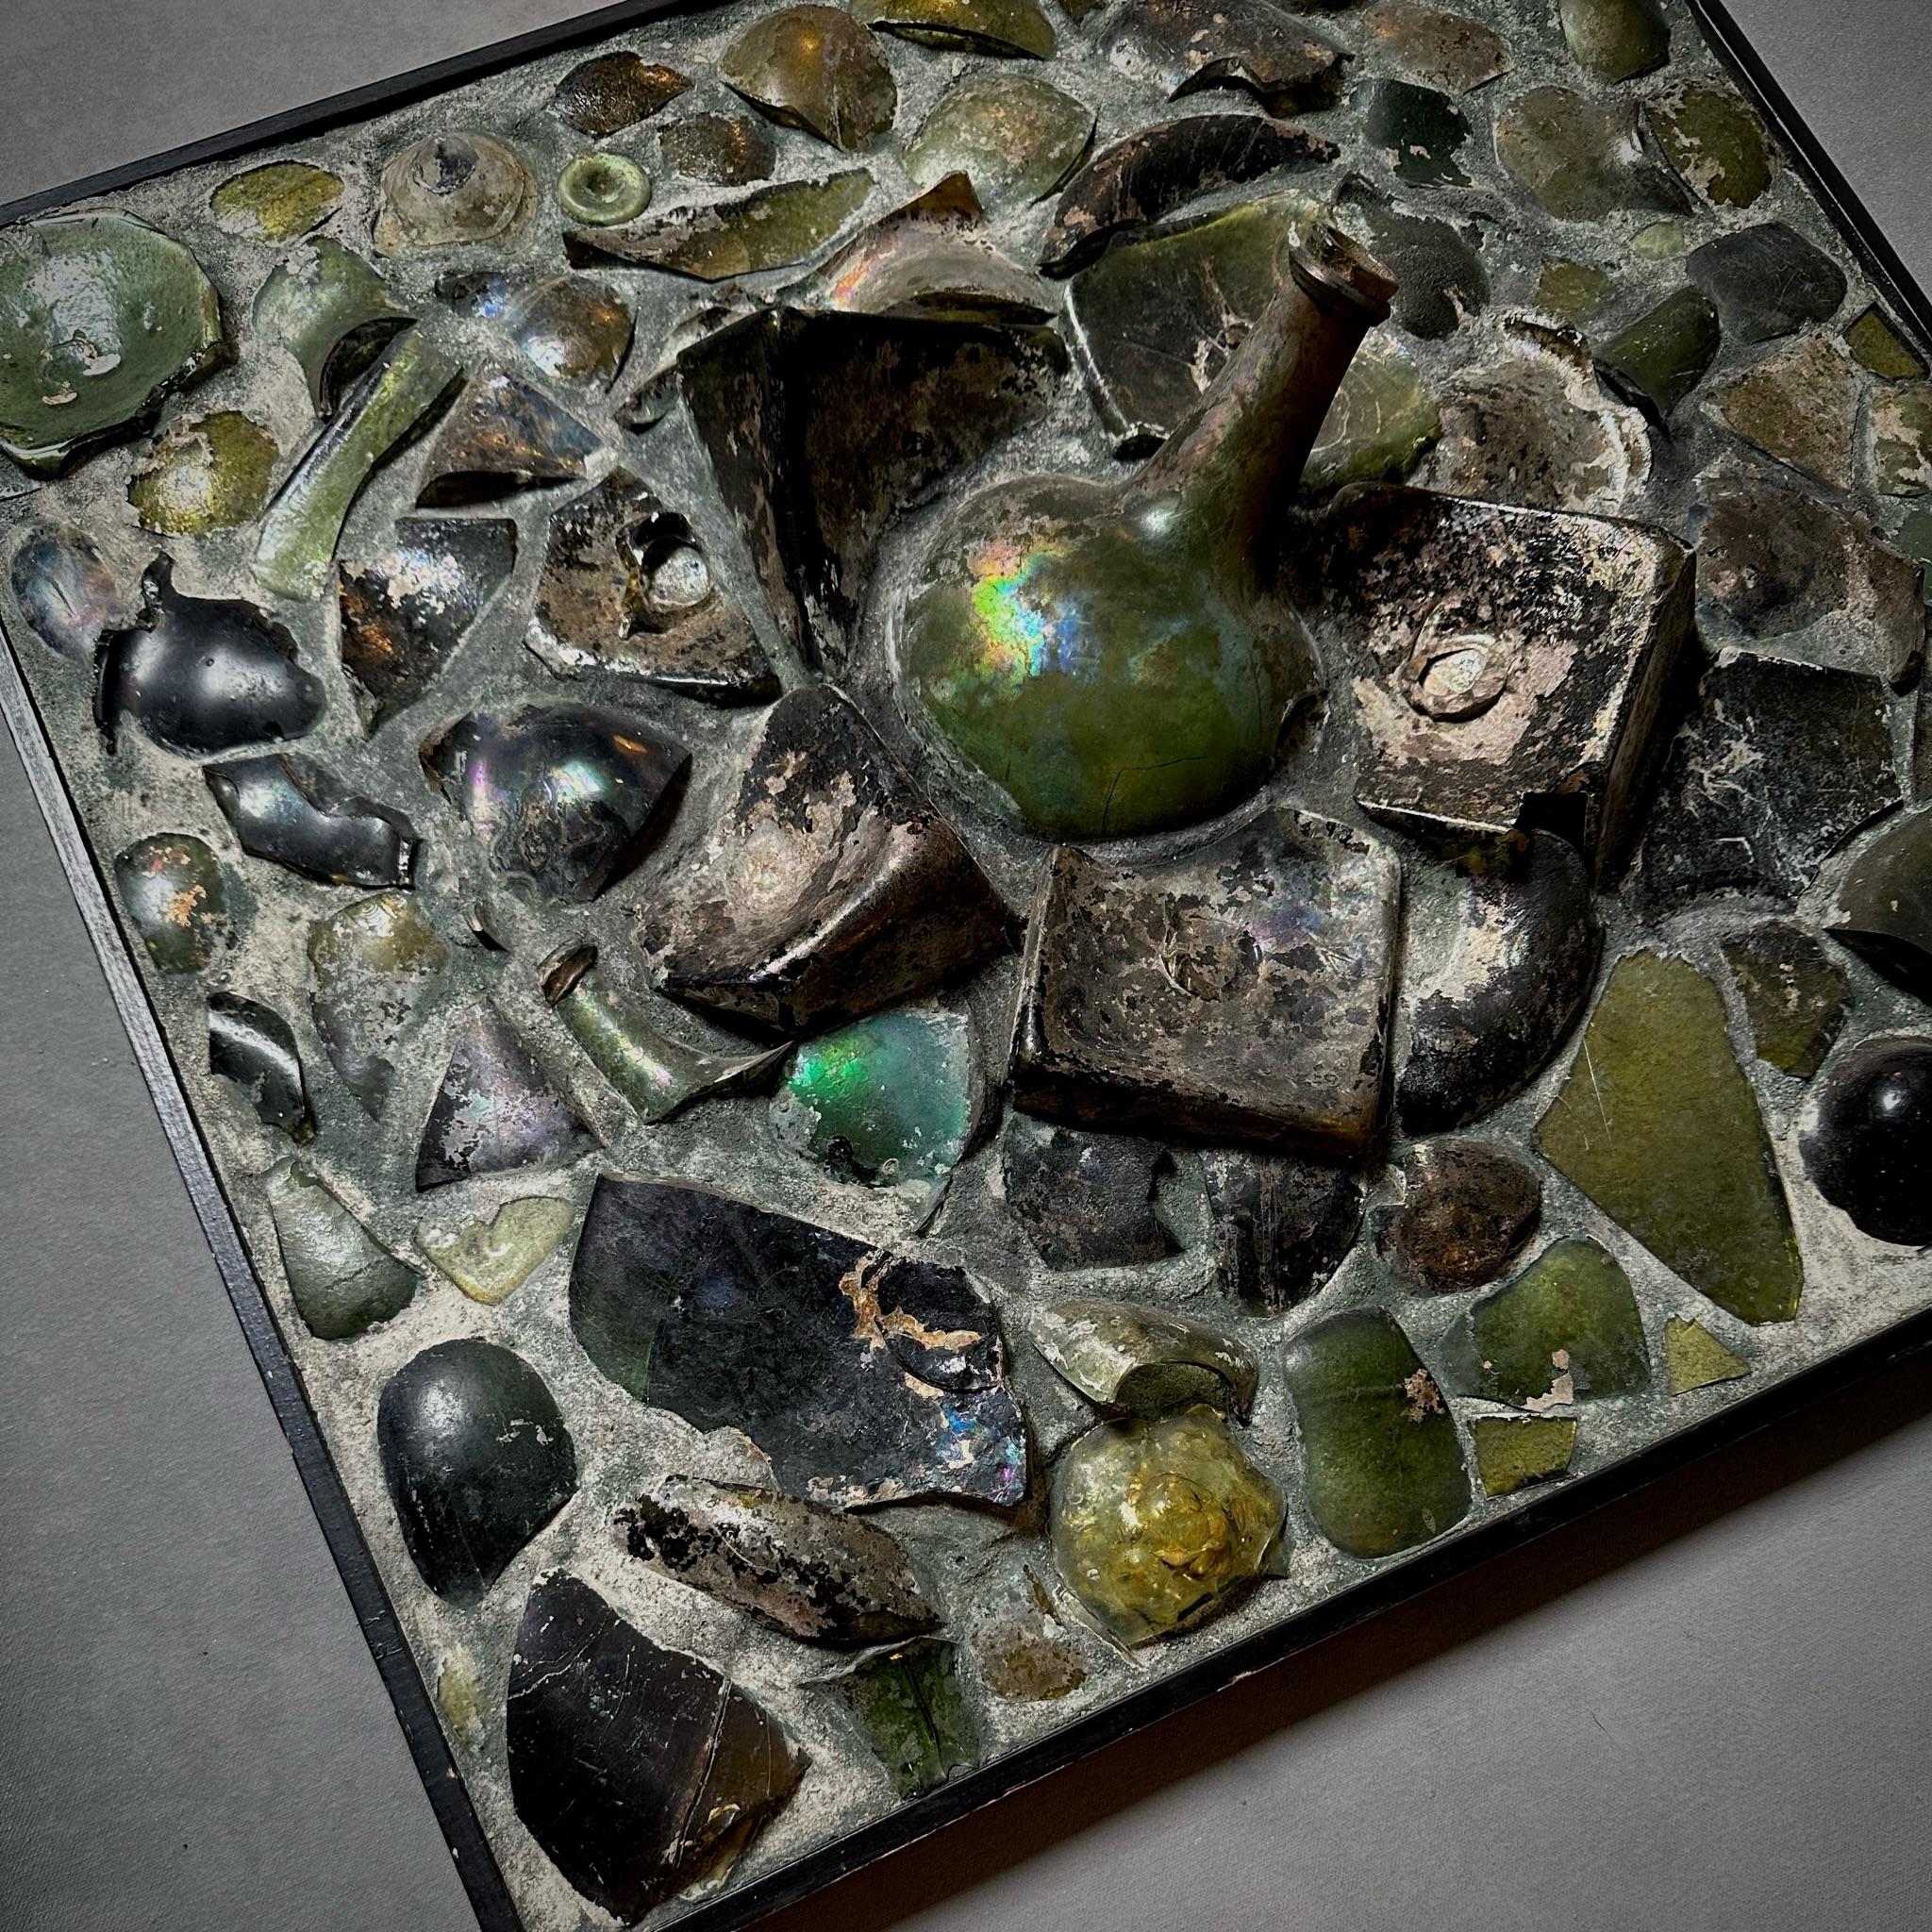 Midcentury art panel made from scraps of antique glass bottles scavenged from the infamous renovation of Amsterdam's Muntplein Square. A dynamic piece with a powerful history. 

Netherlands, circa 1940

Dimensions: 22.5W x 1.5D x 21.5H.